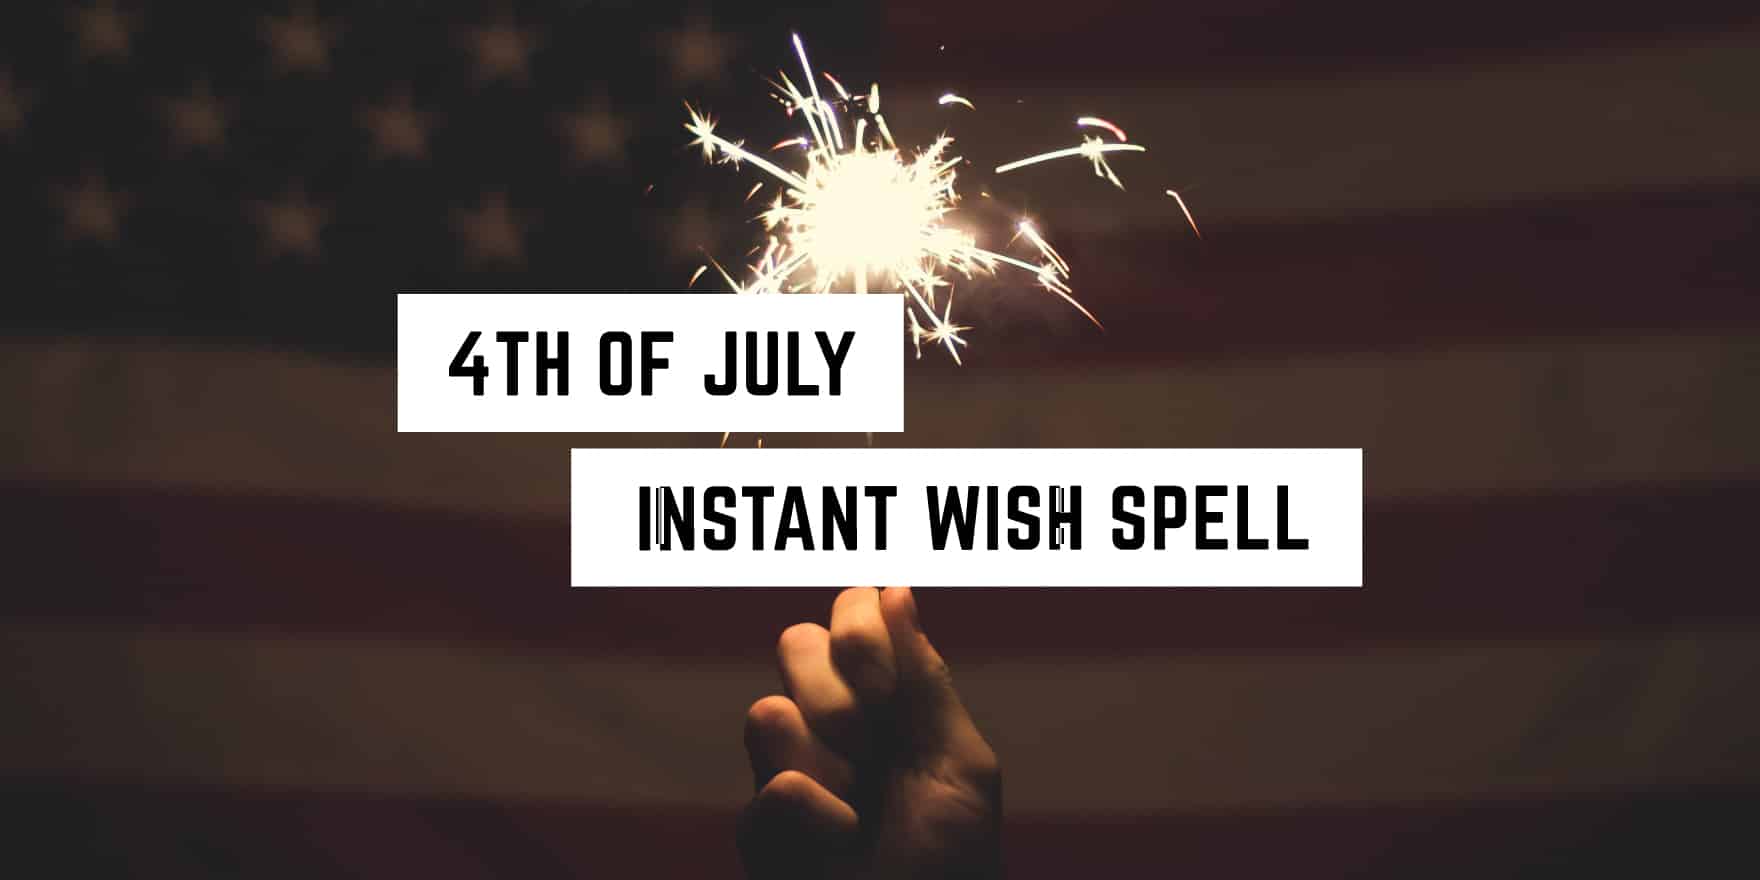 A hand holding a sparkler, with the American flag in the background, overlaid with text "4th of July - instant wish spell," infused with metaphysical energy.